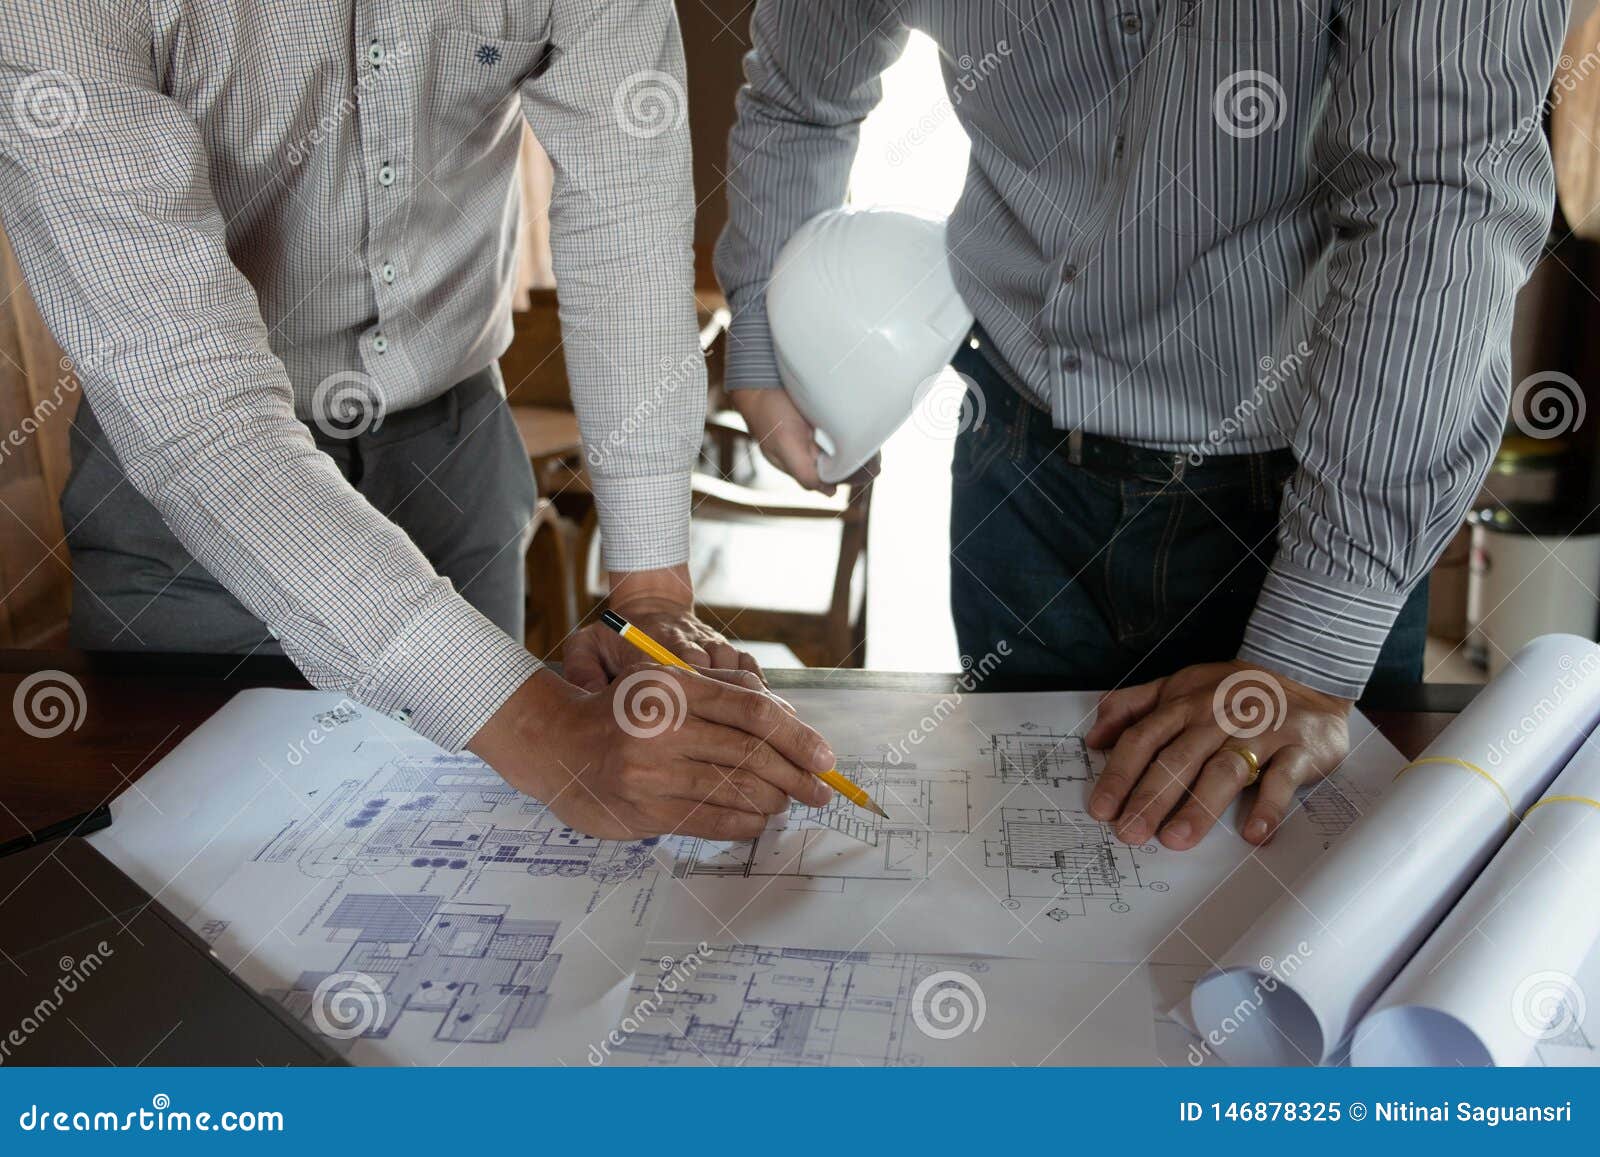 engineering and design consultancy